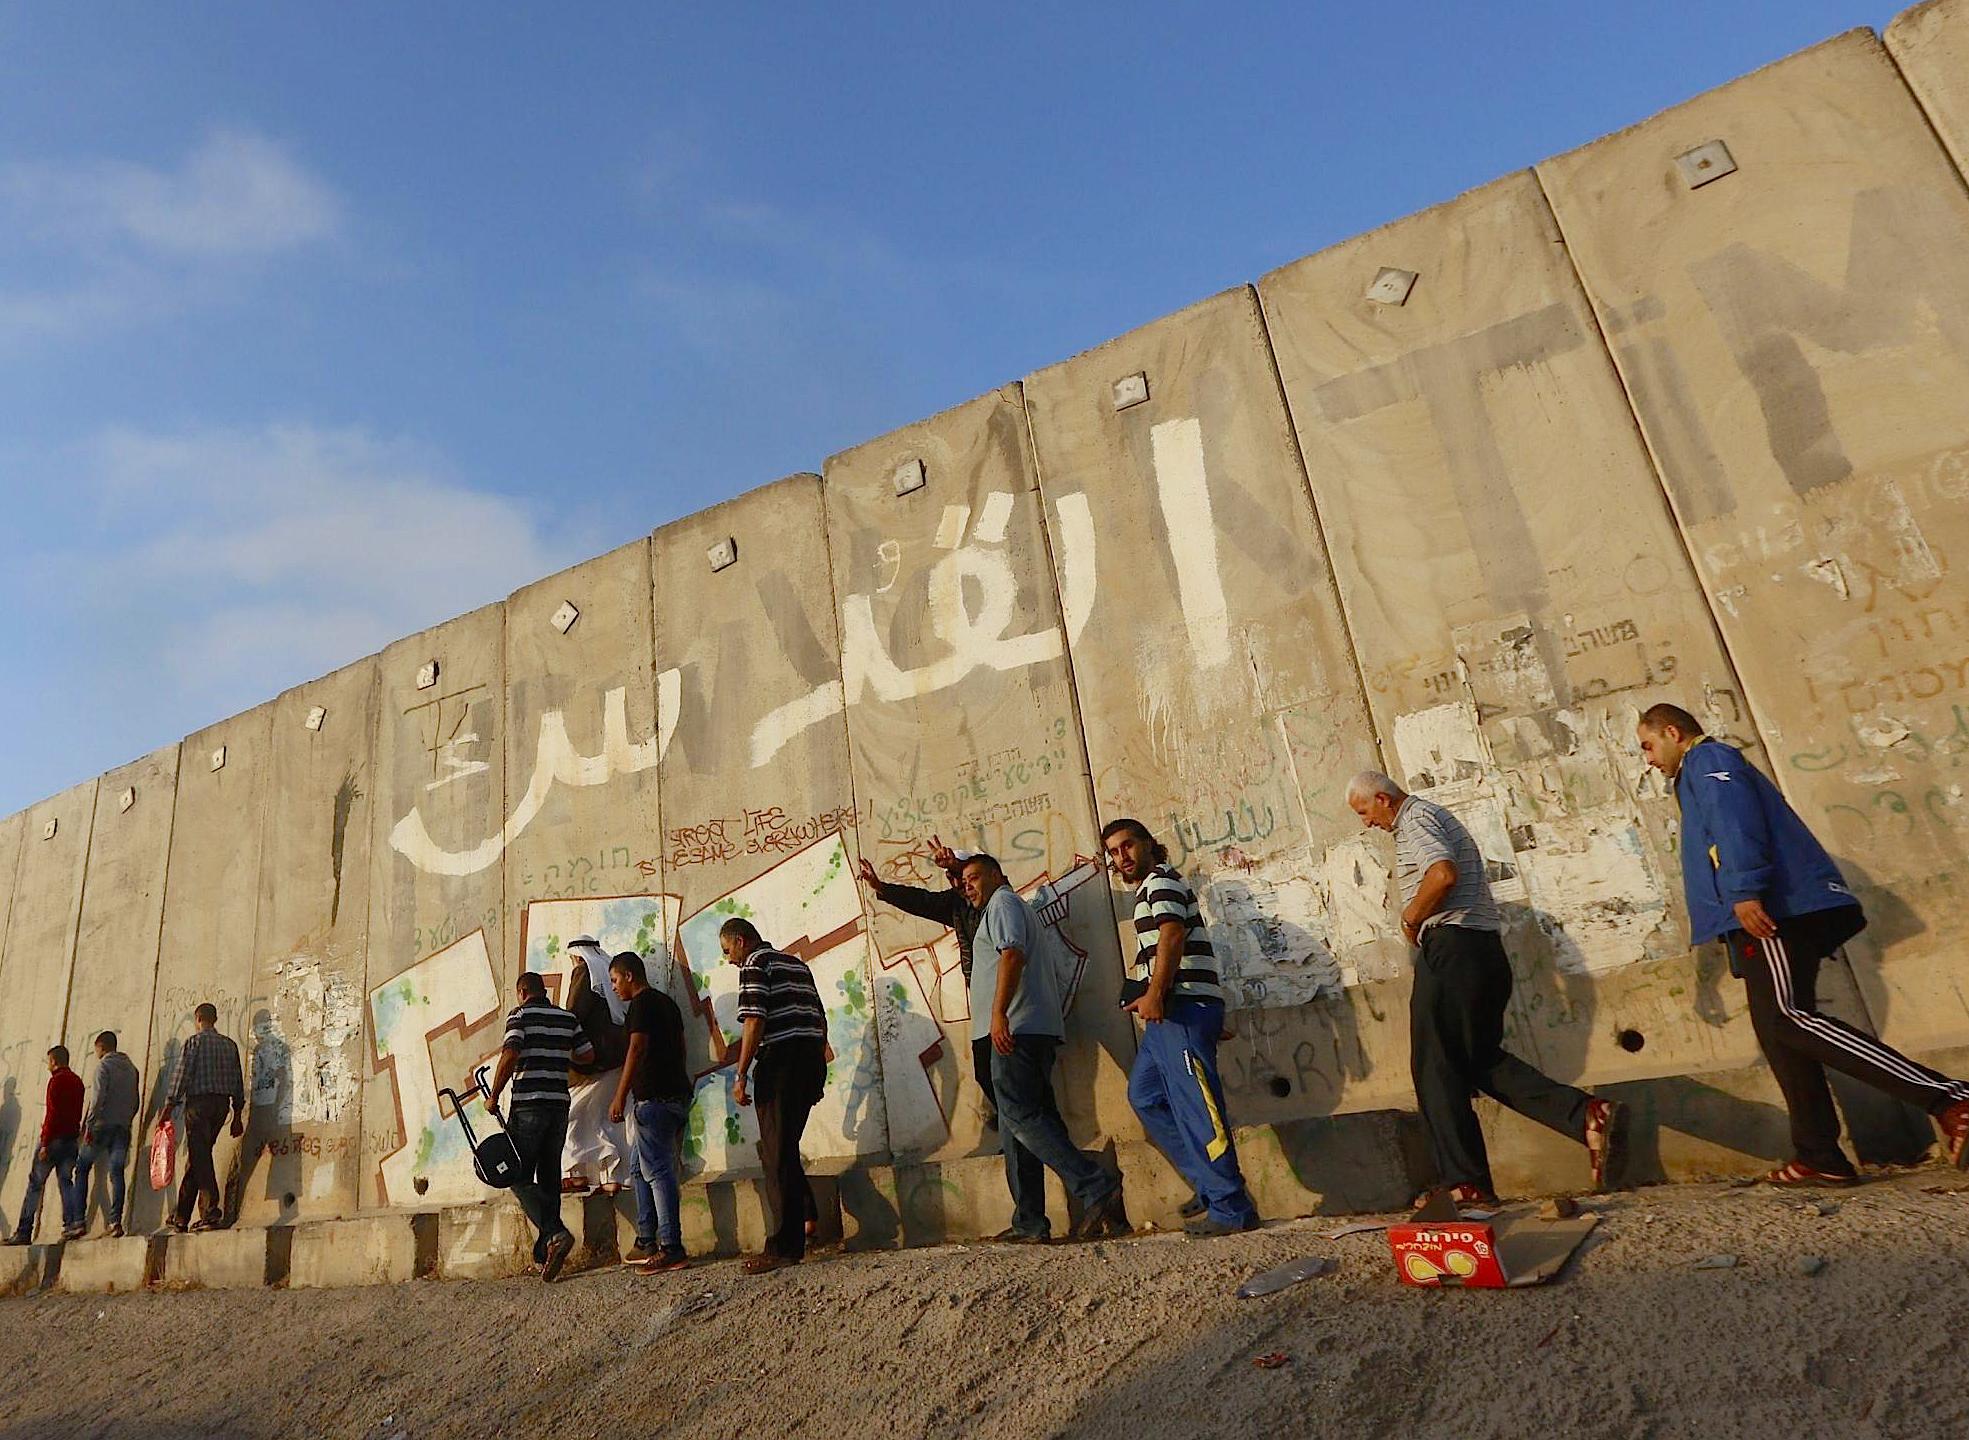 Palestinian men walk next to the Israeli West Bank seperation barrier - wall